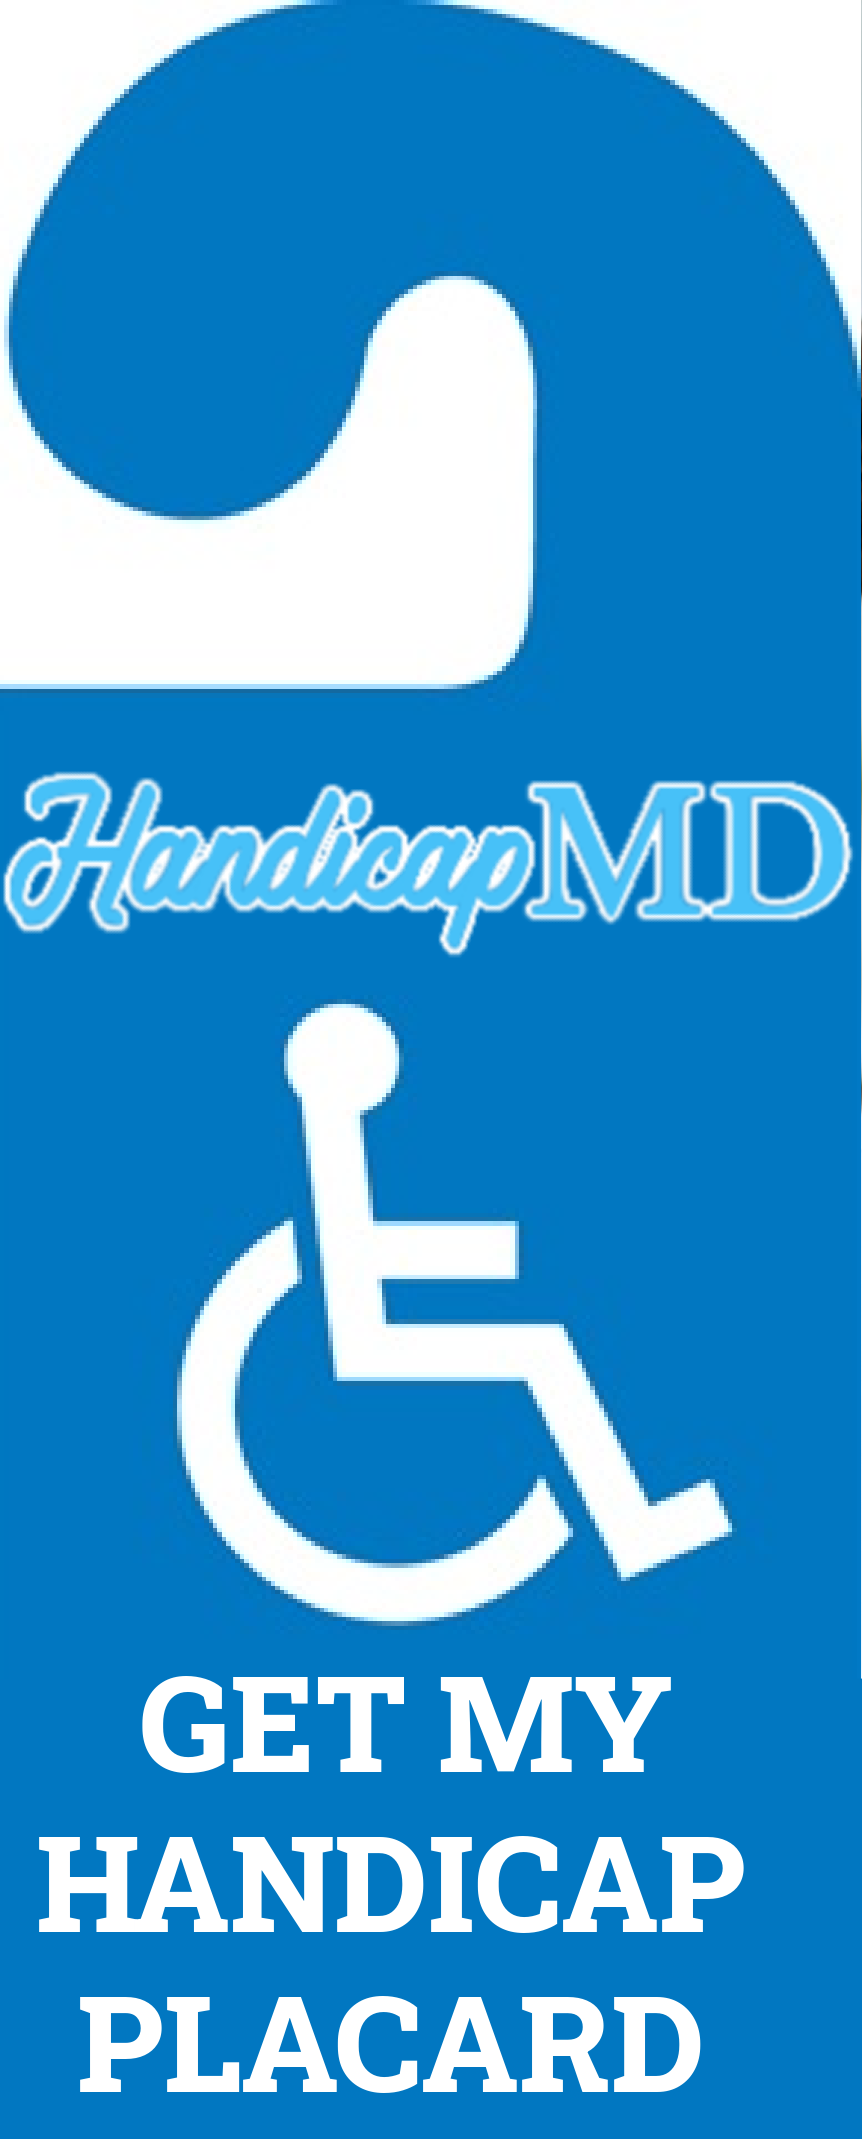 The Impact of Handicap Placard Abuse and How to Report it in West Virginia